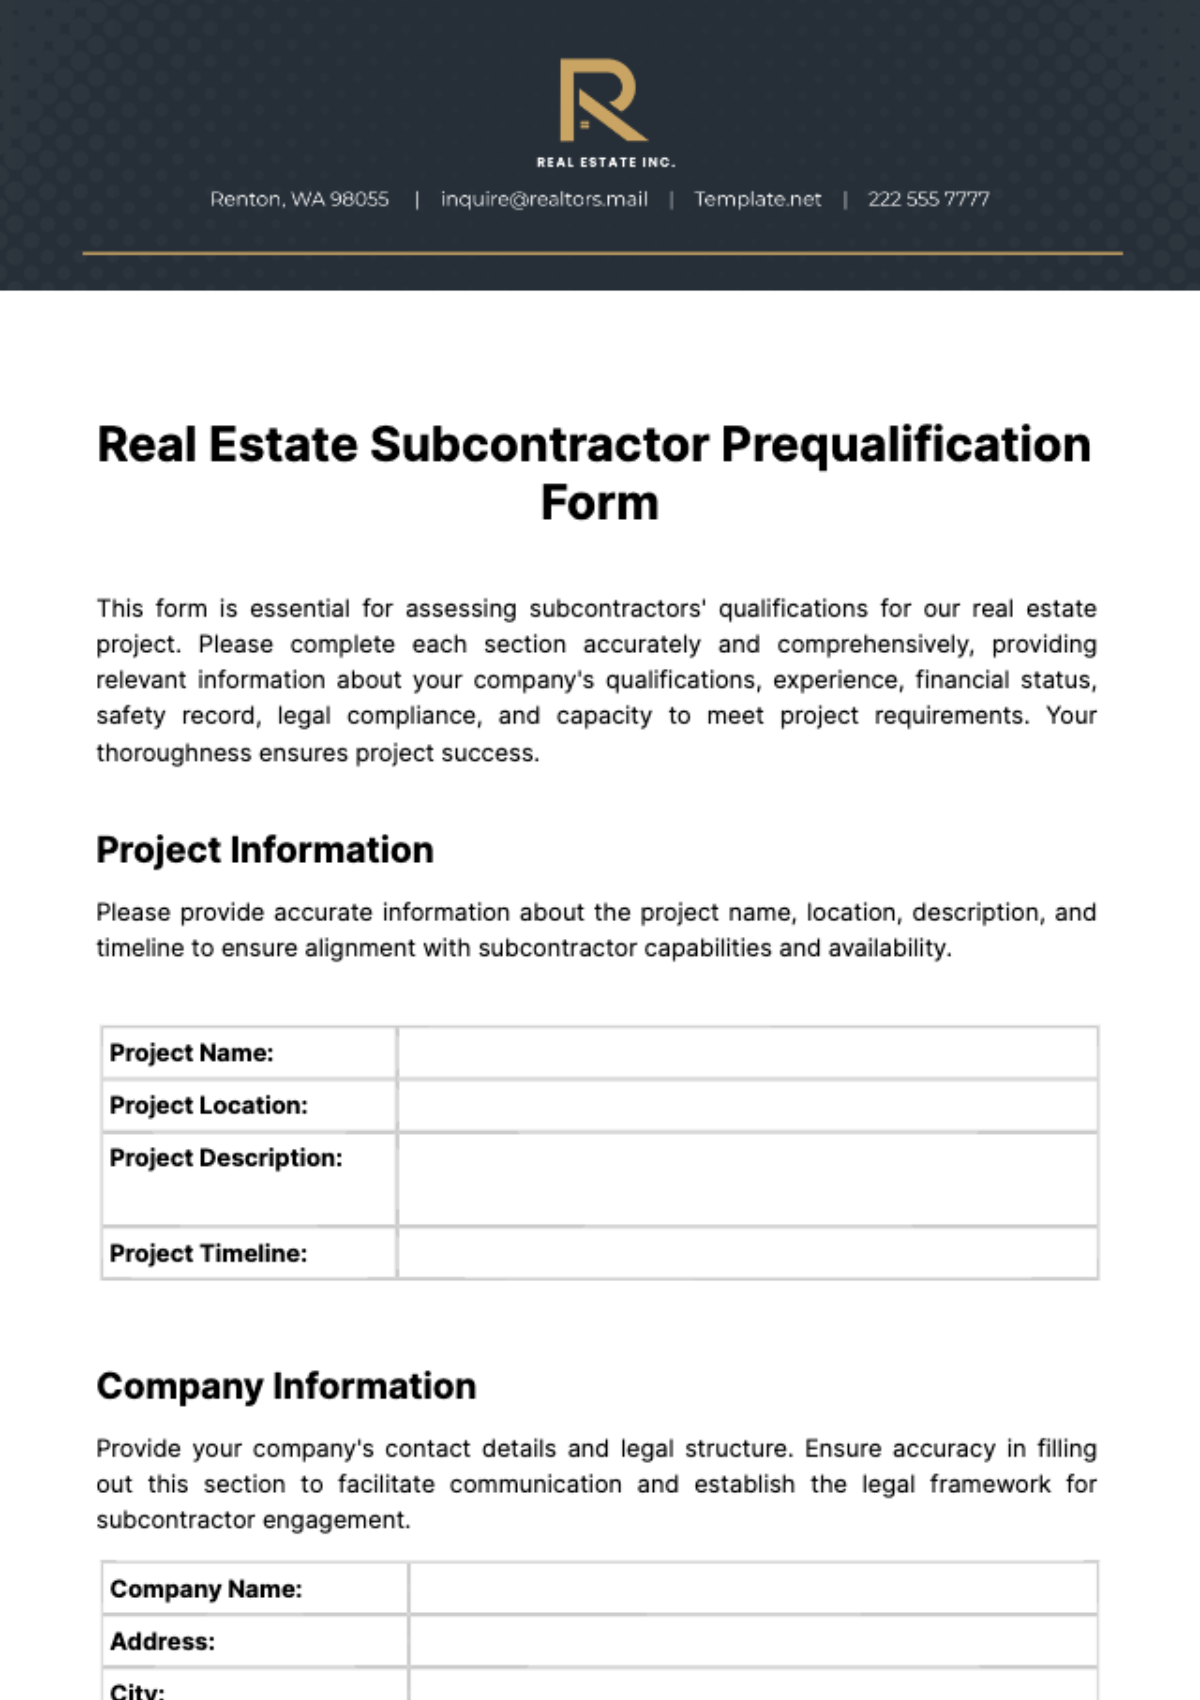 Real Estate Subcontractor Prequalification Form Template